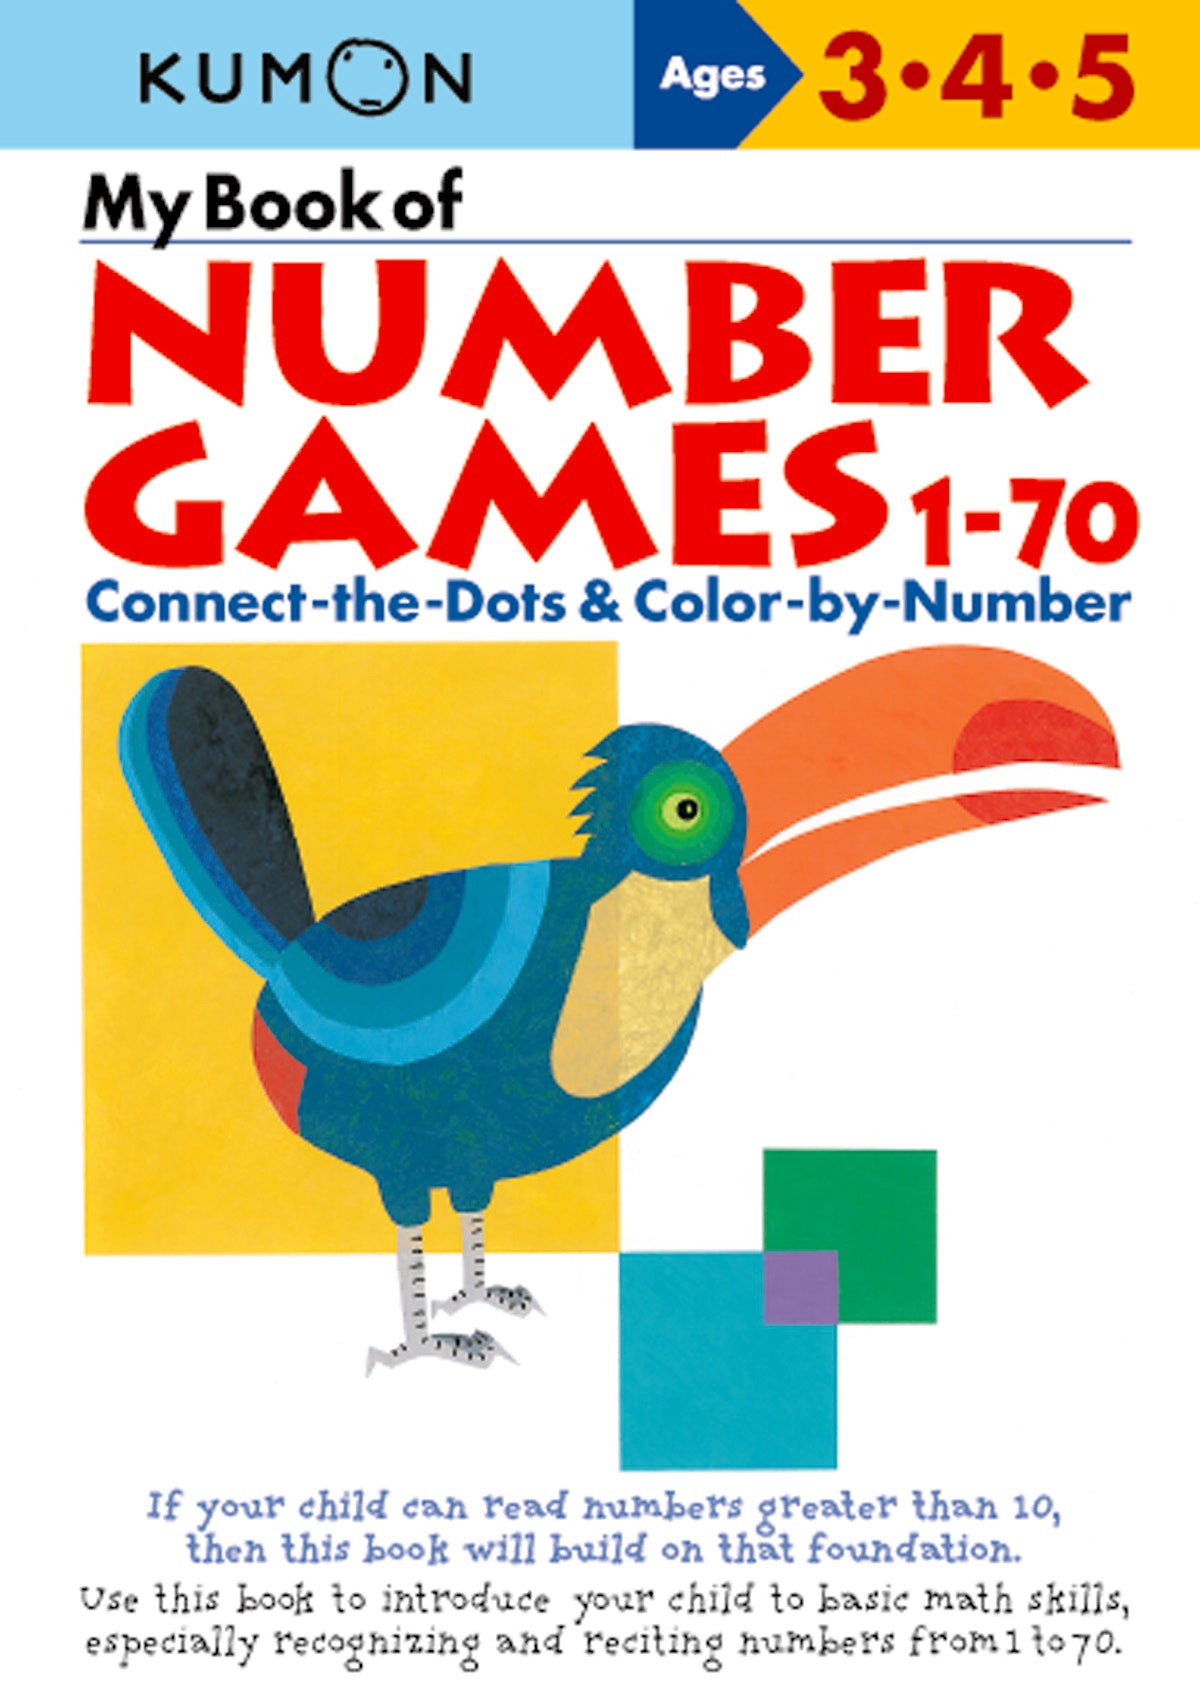 Kumon My Book Of Numbers Games 1-70